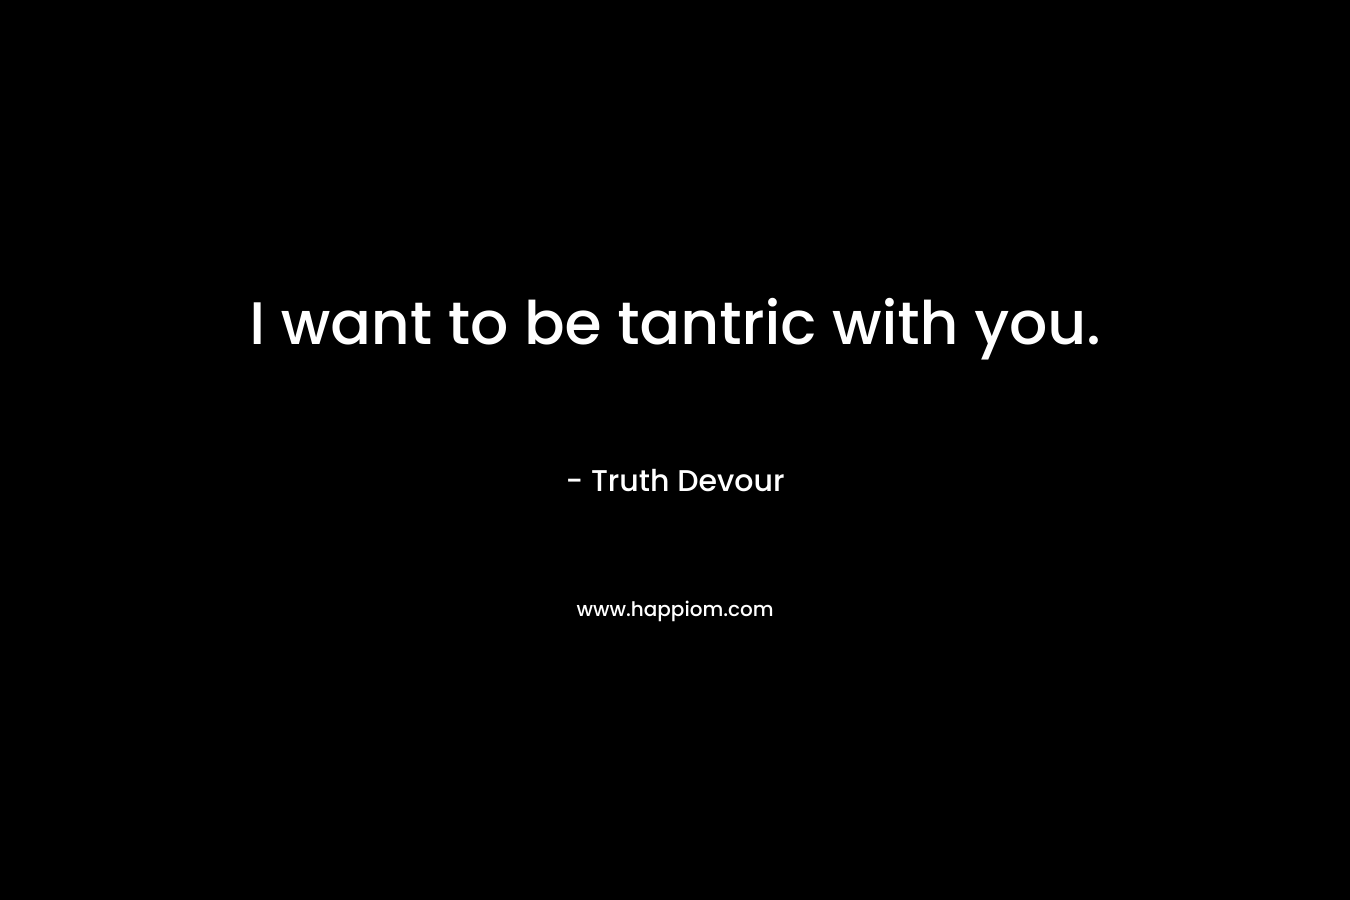 I want to be tantric with you.